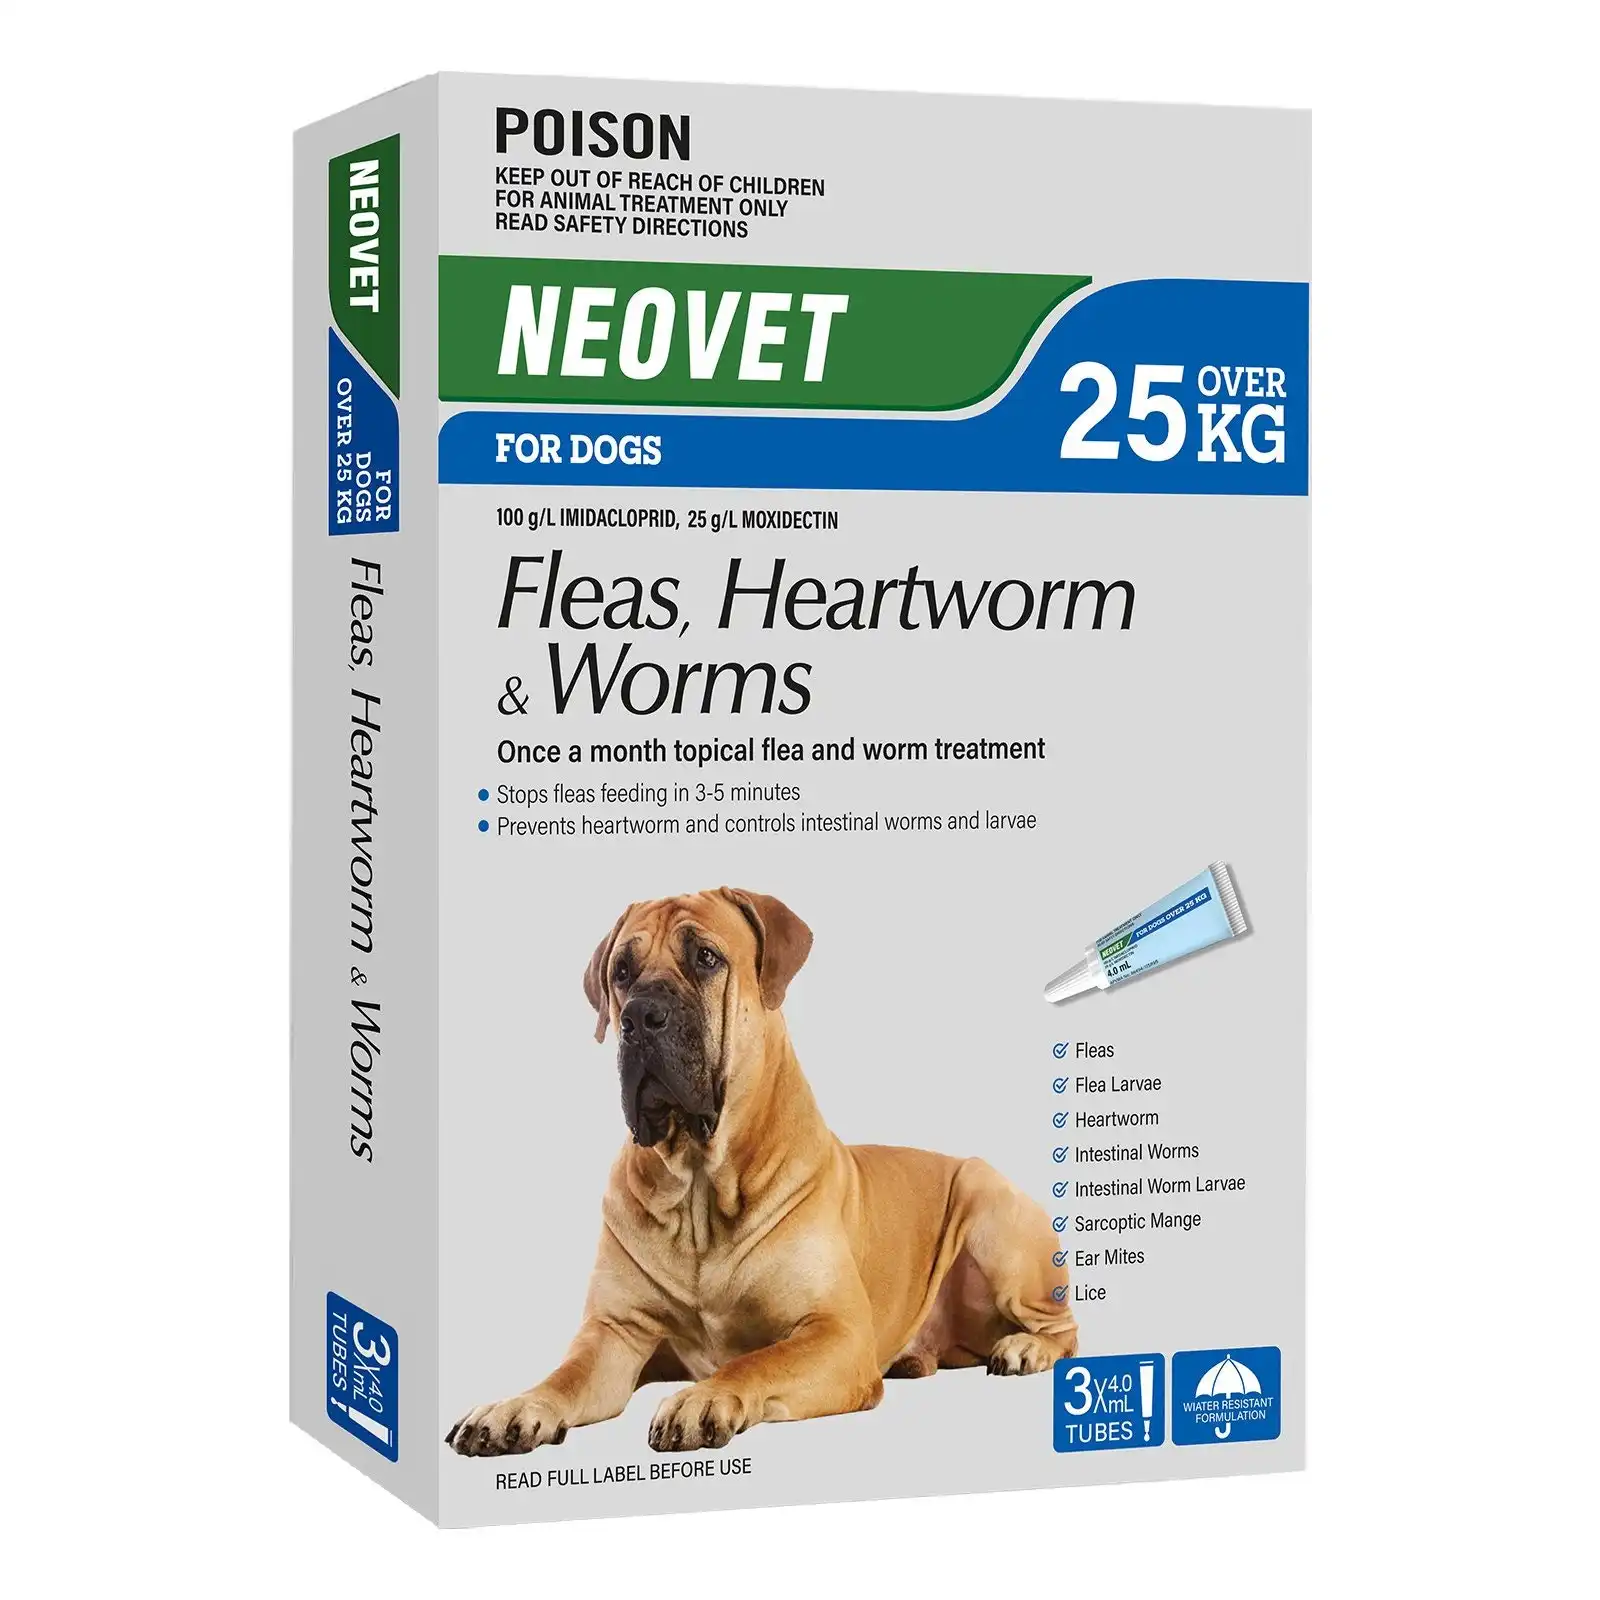 Neovet - Generic Advocate for Dogs Over 25 Kg (BLUE) 3 Pack